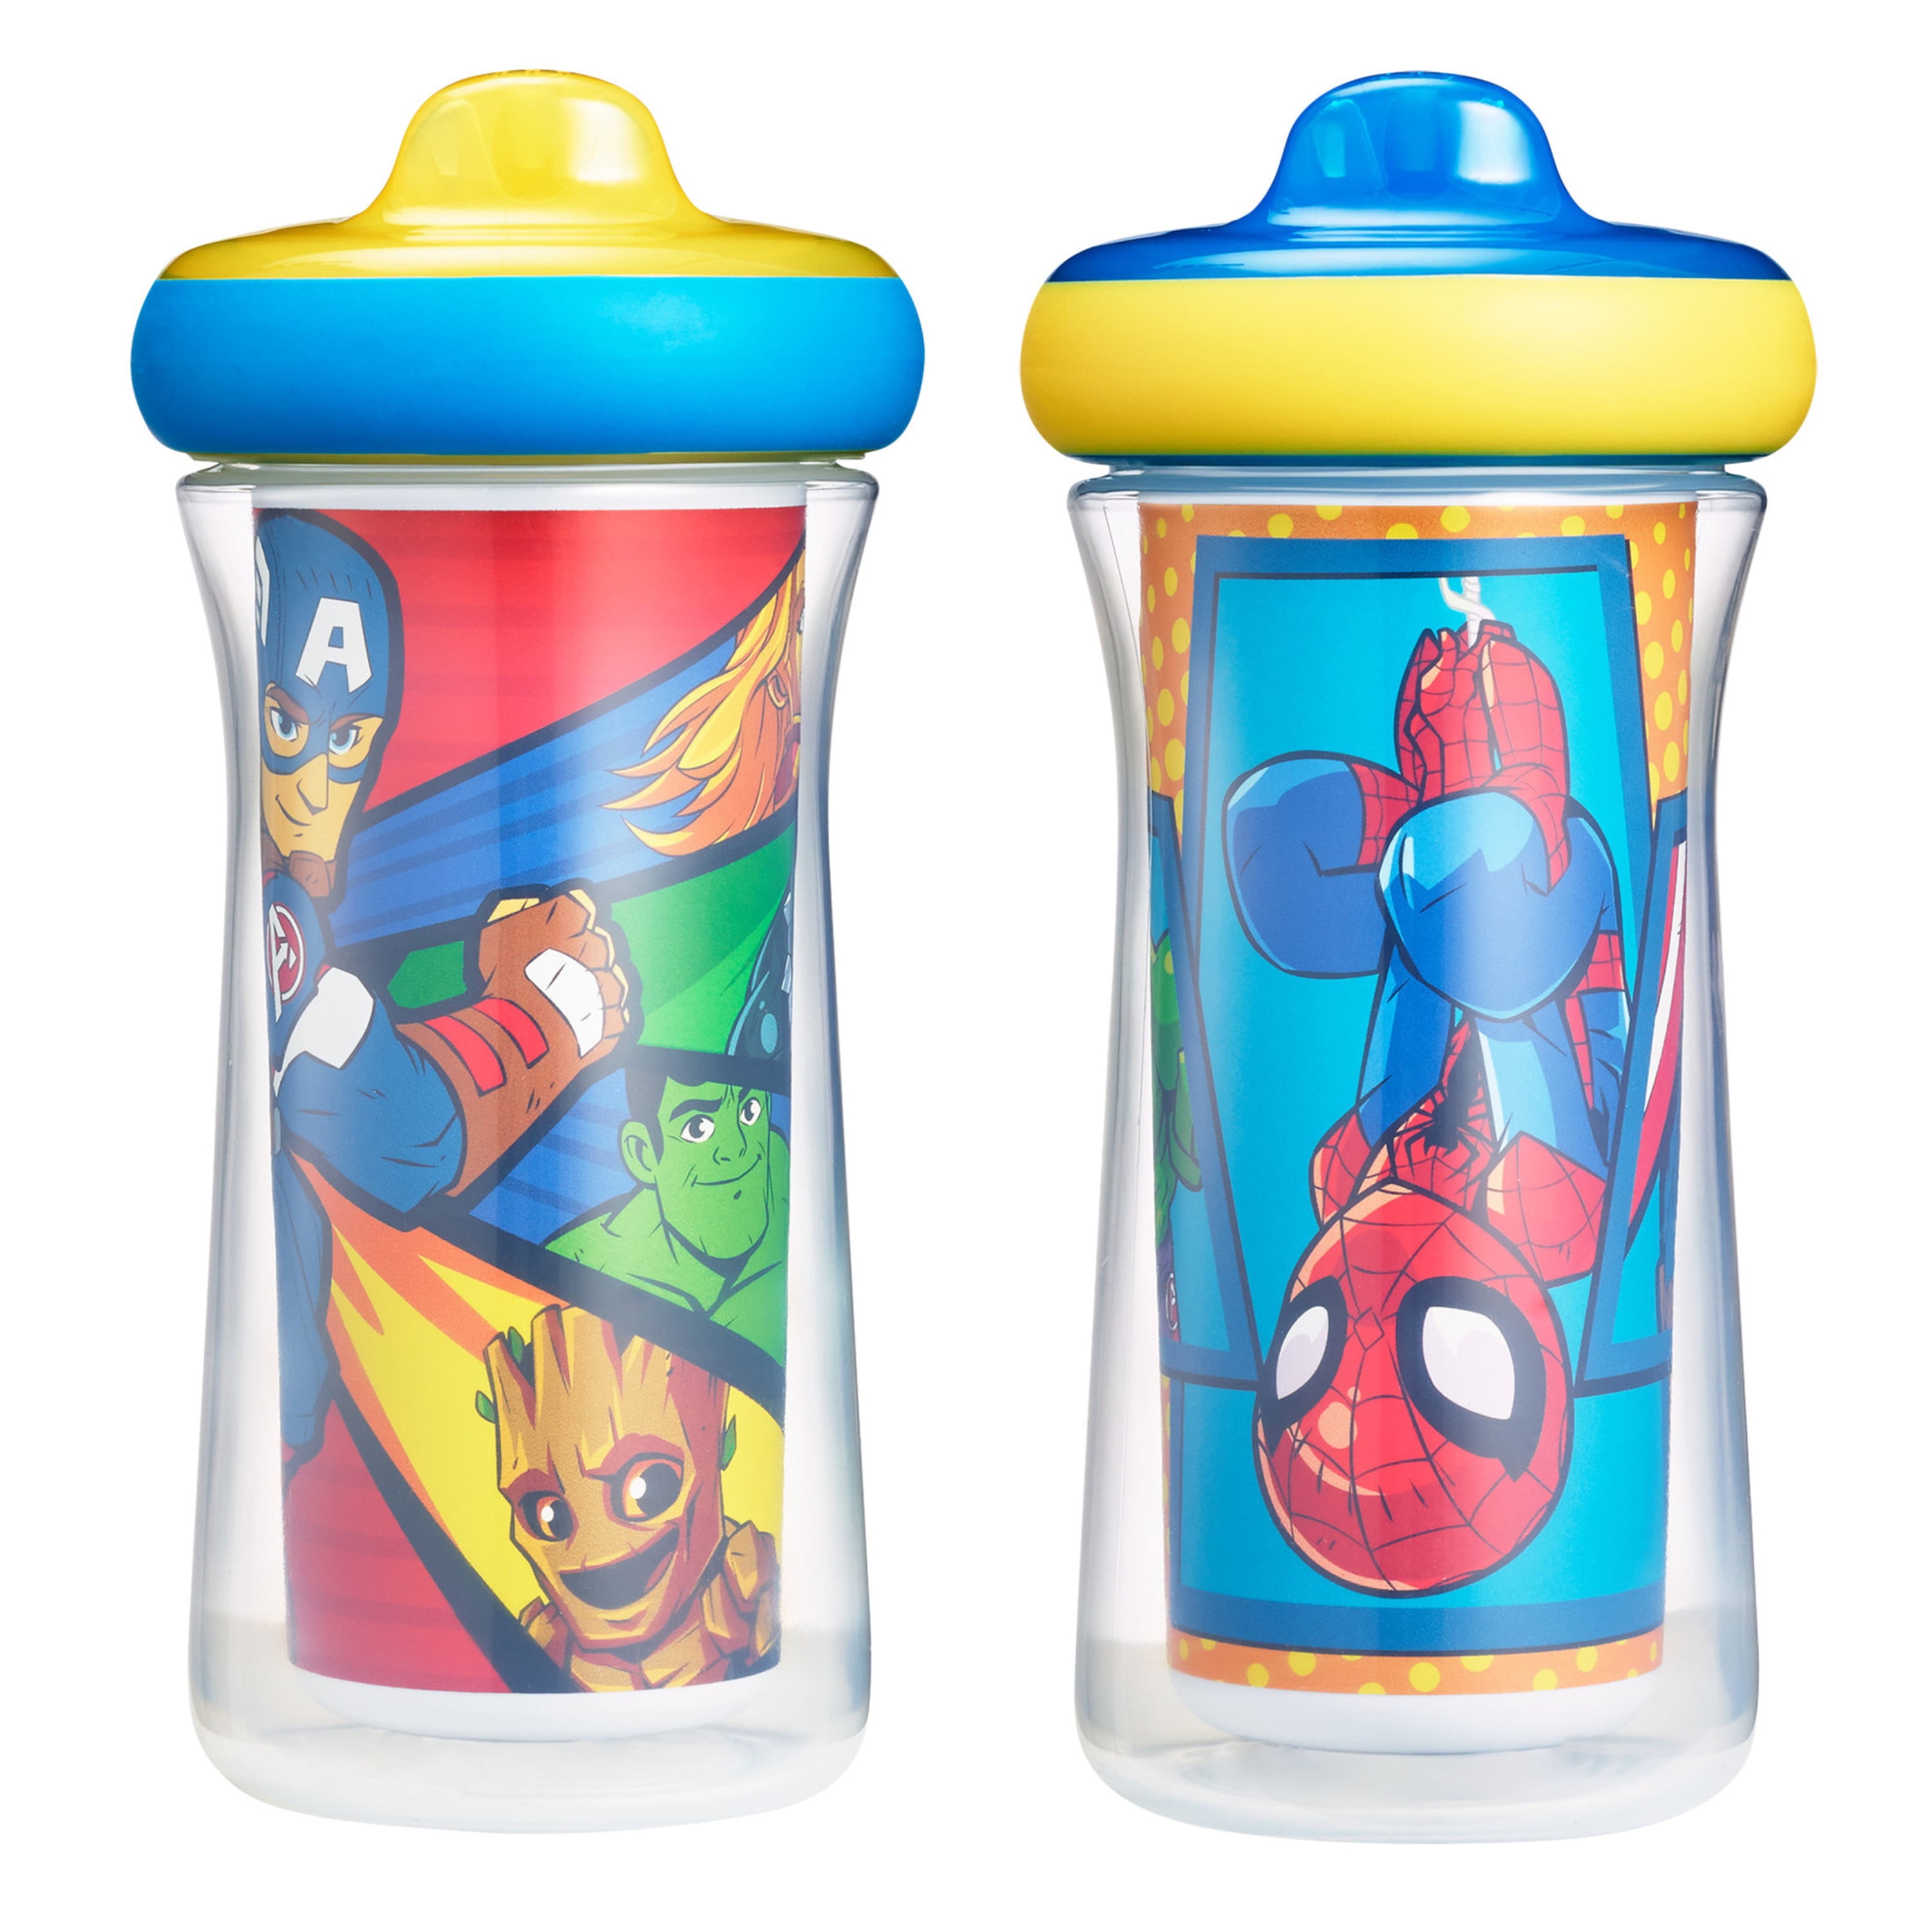 Gerber Graduates Ultimate Insulated 9 oz Sippy Cup 1 ea Pack of 5 